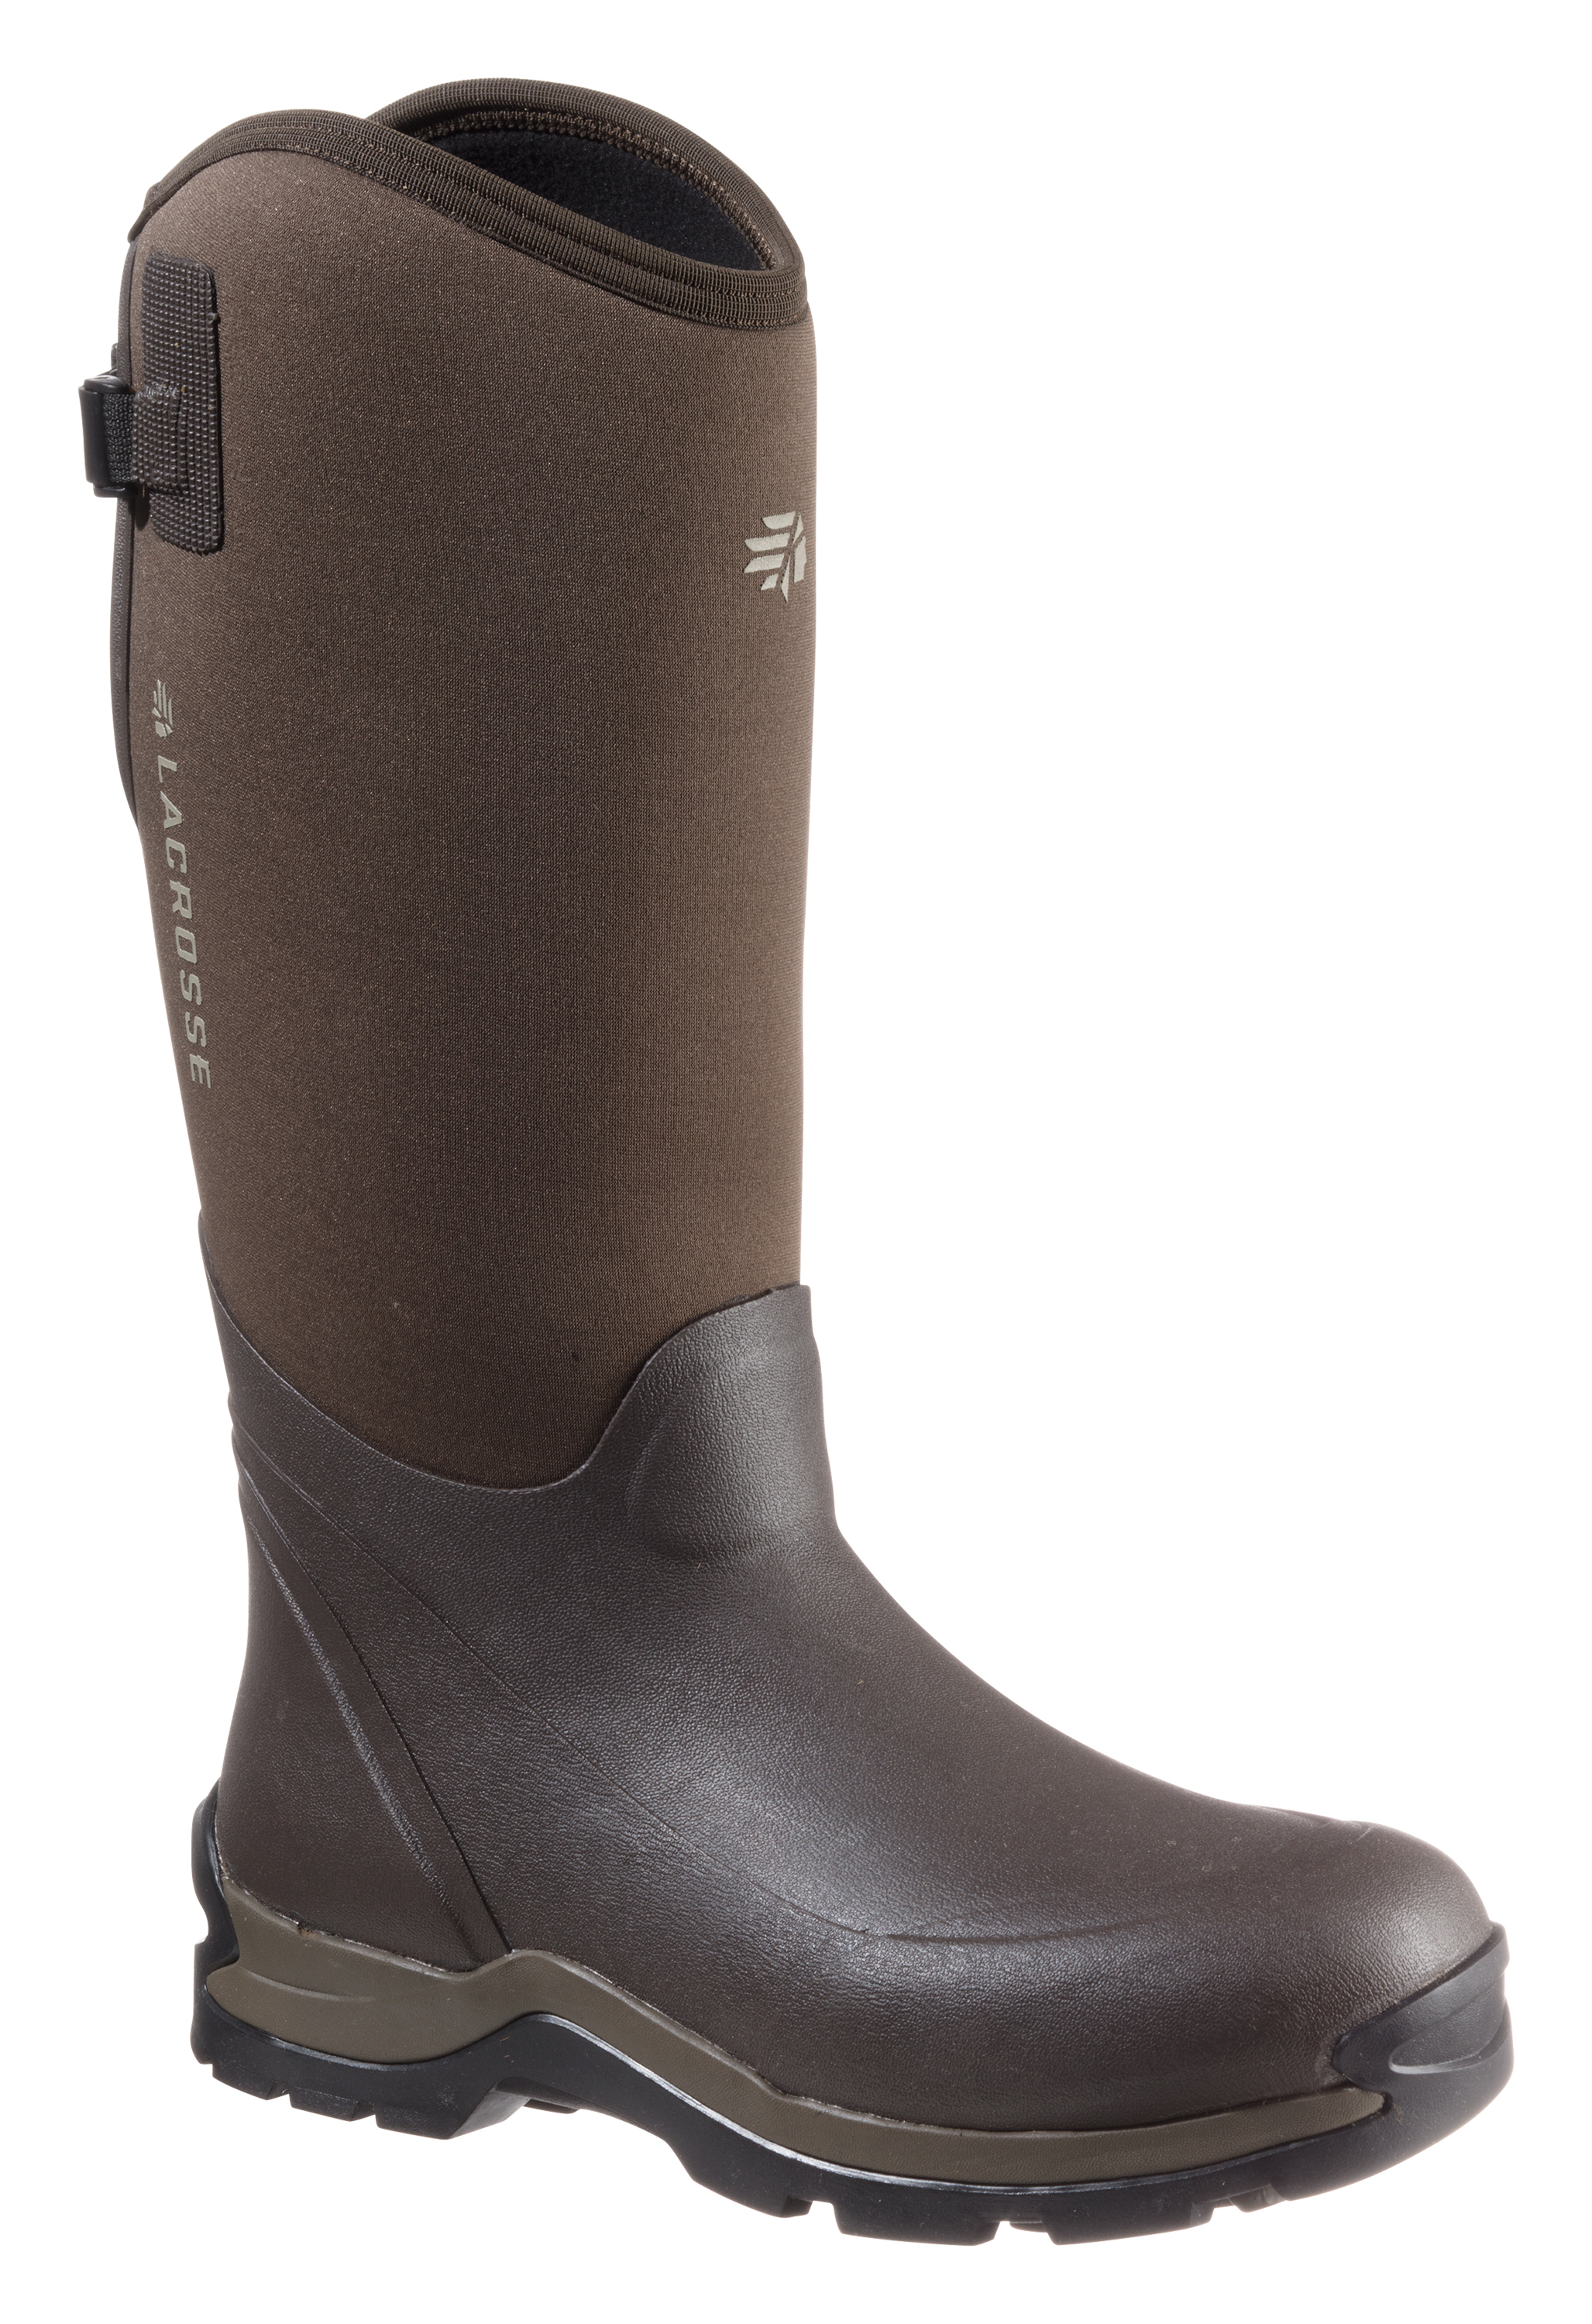 LaCrosse Alpha Thermal Waterproof Rubber Boots for Men | Cabela's